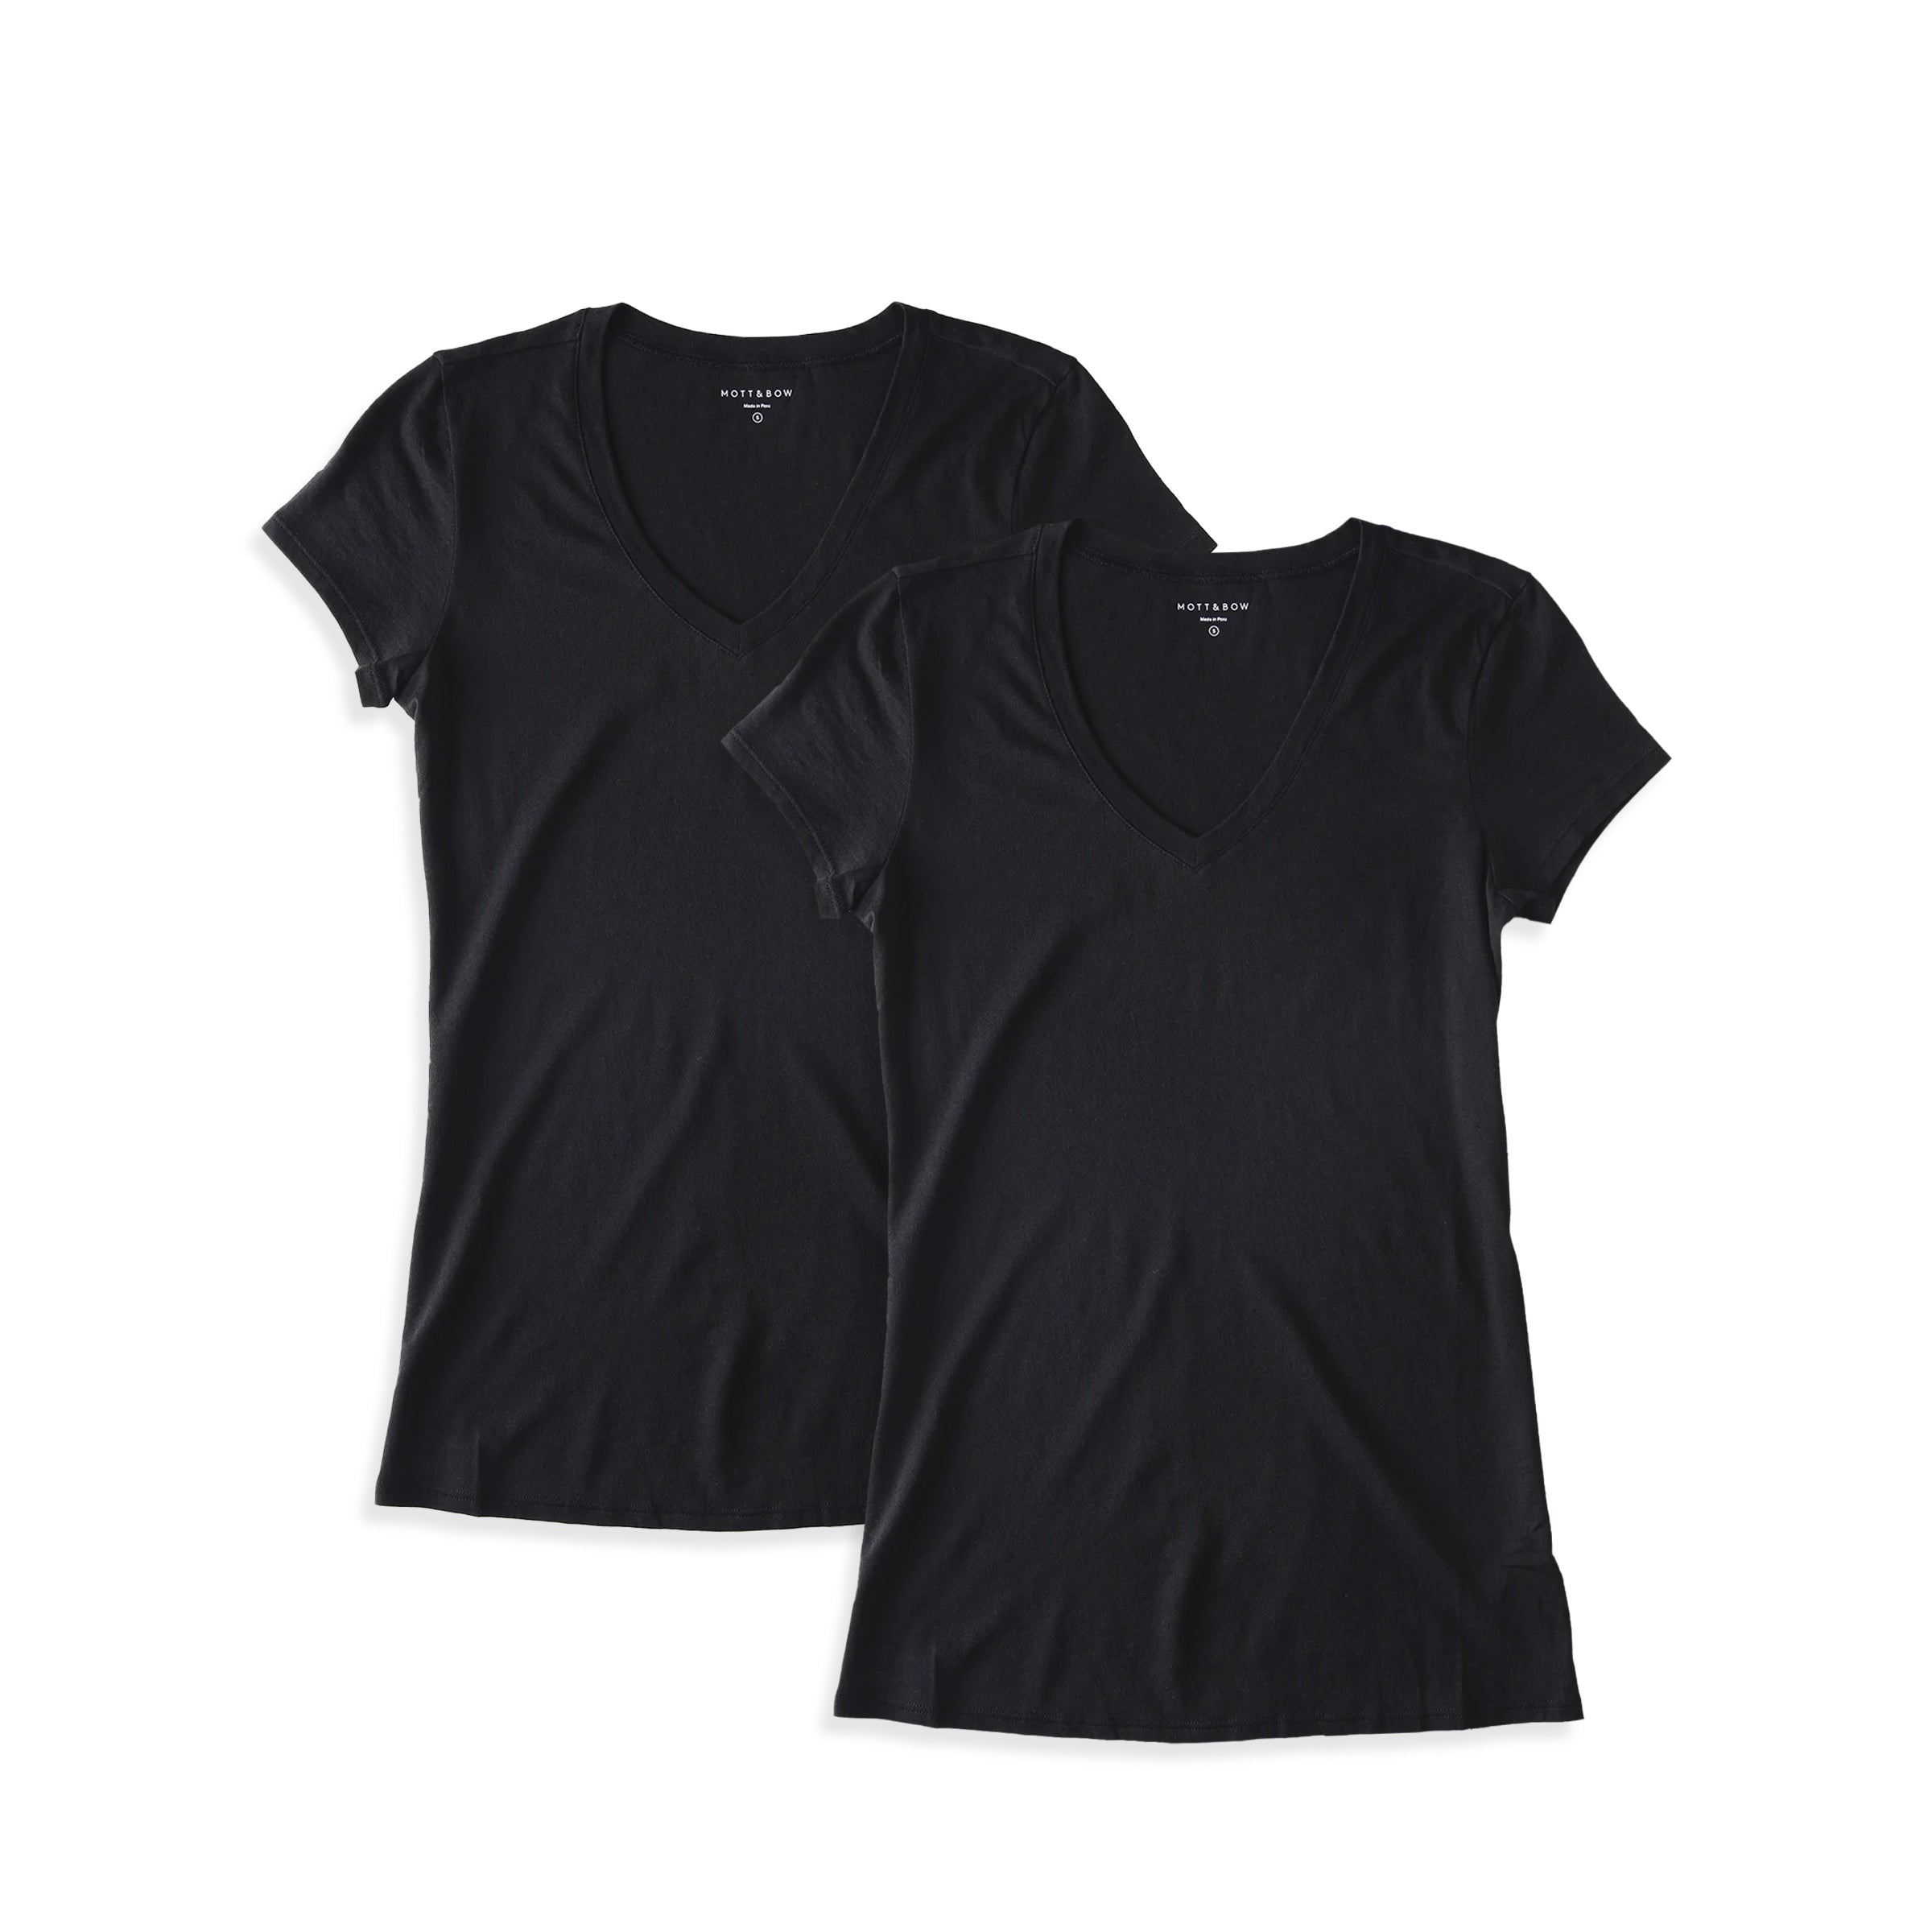  wearing 2 Black Fitted V-Neck Marcy 2-Pack